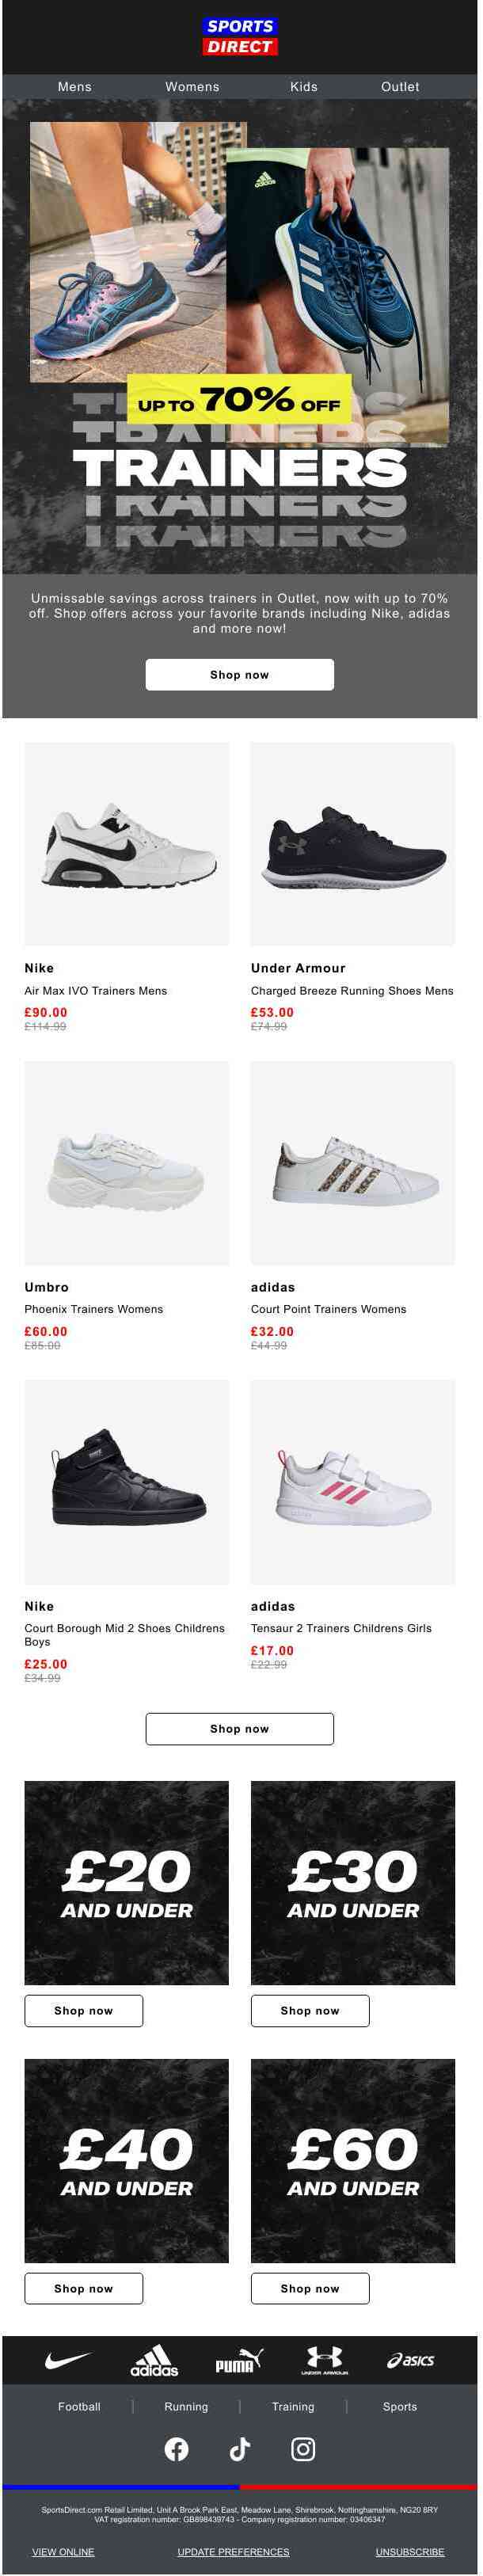 Open for up to 70% off Trainers 👟